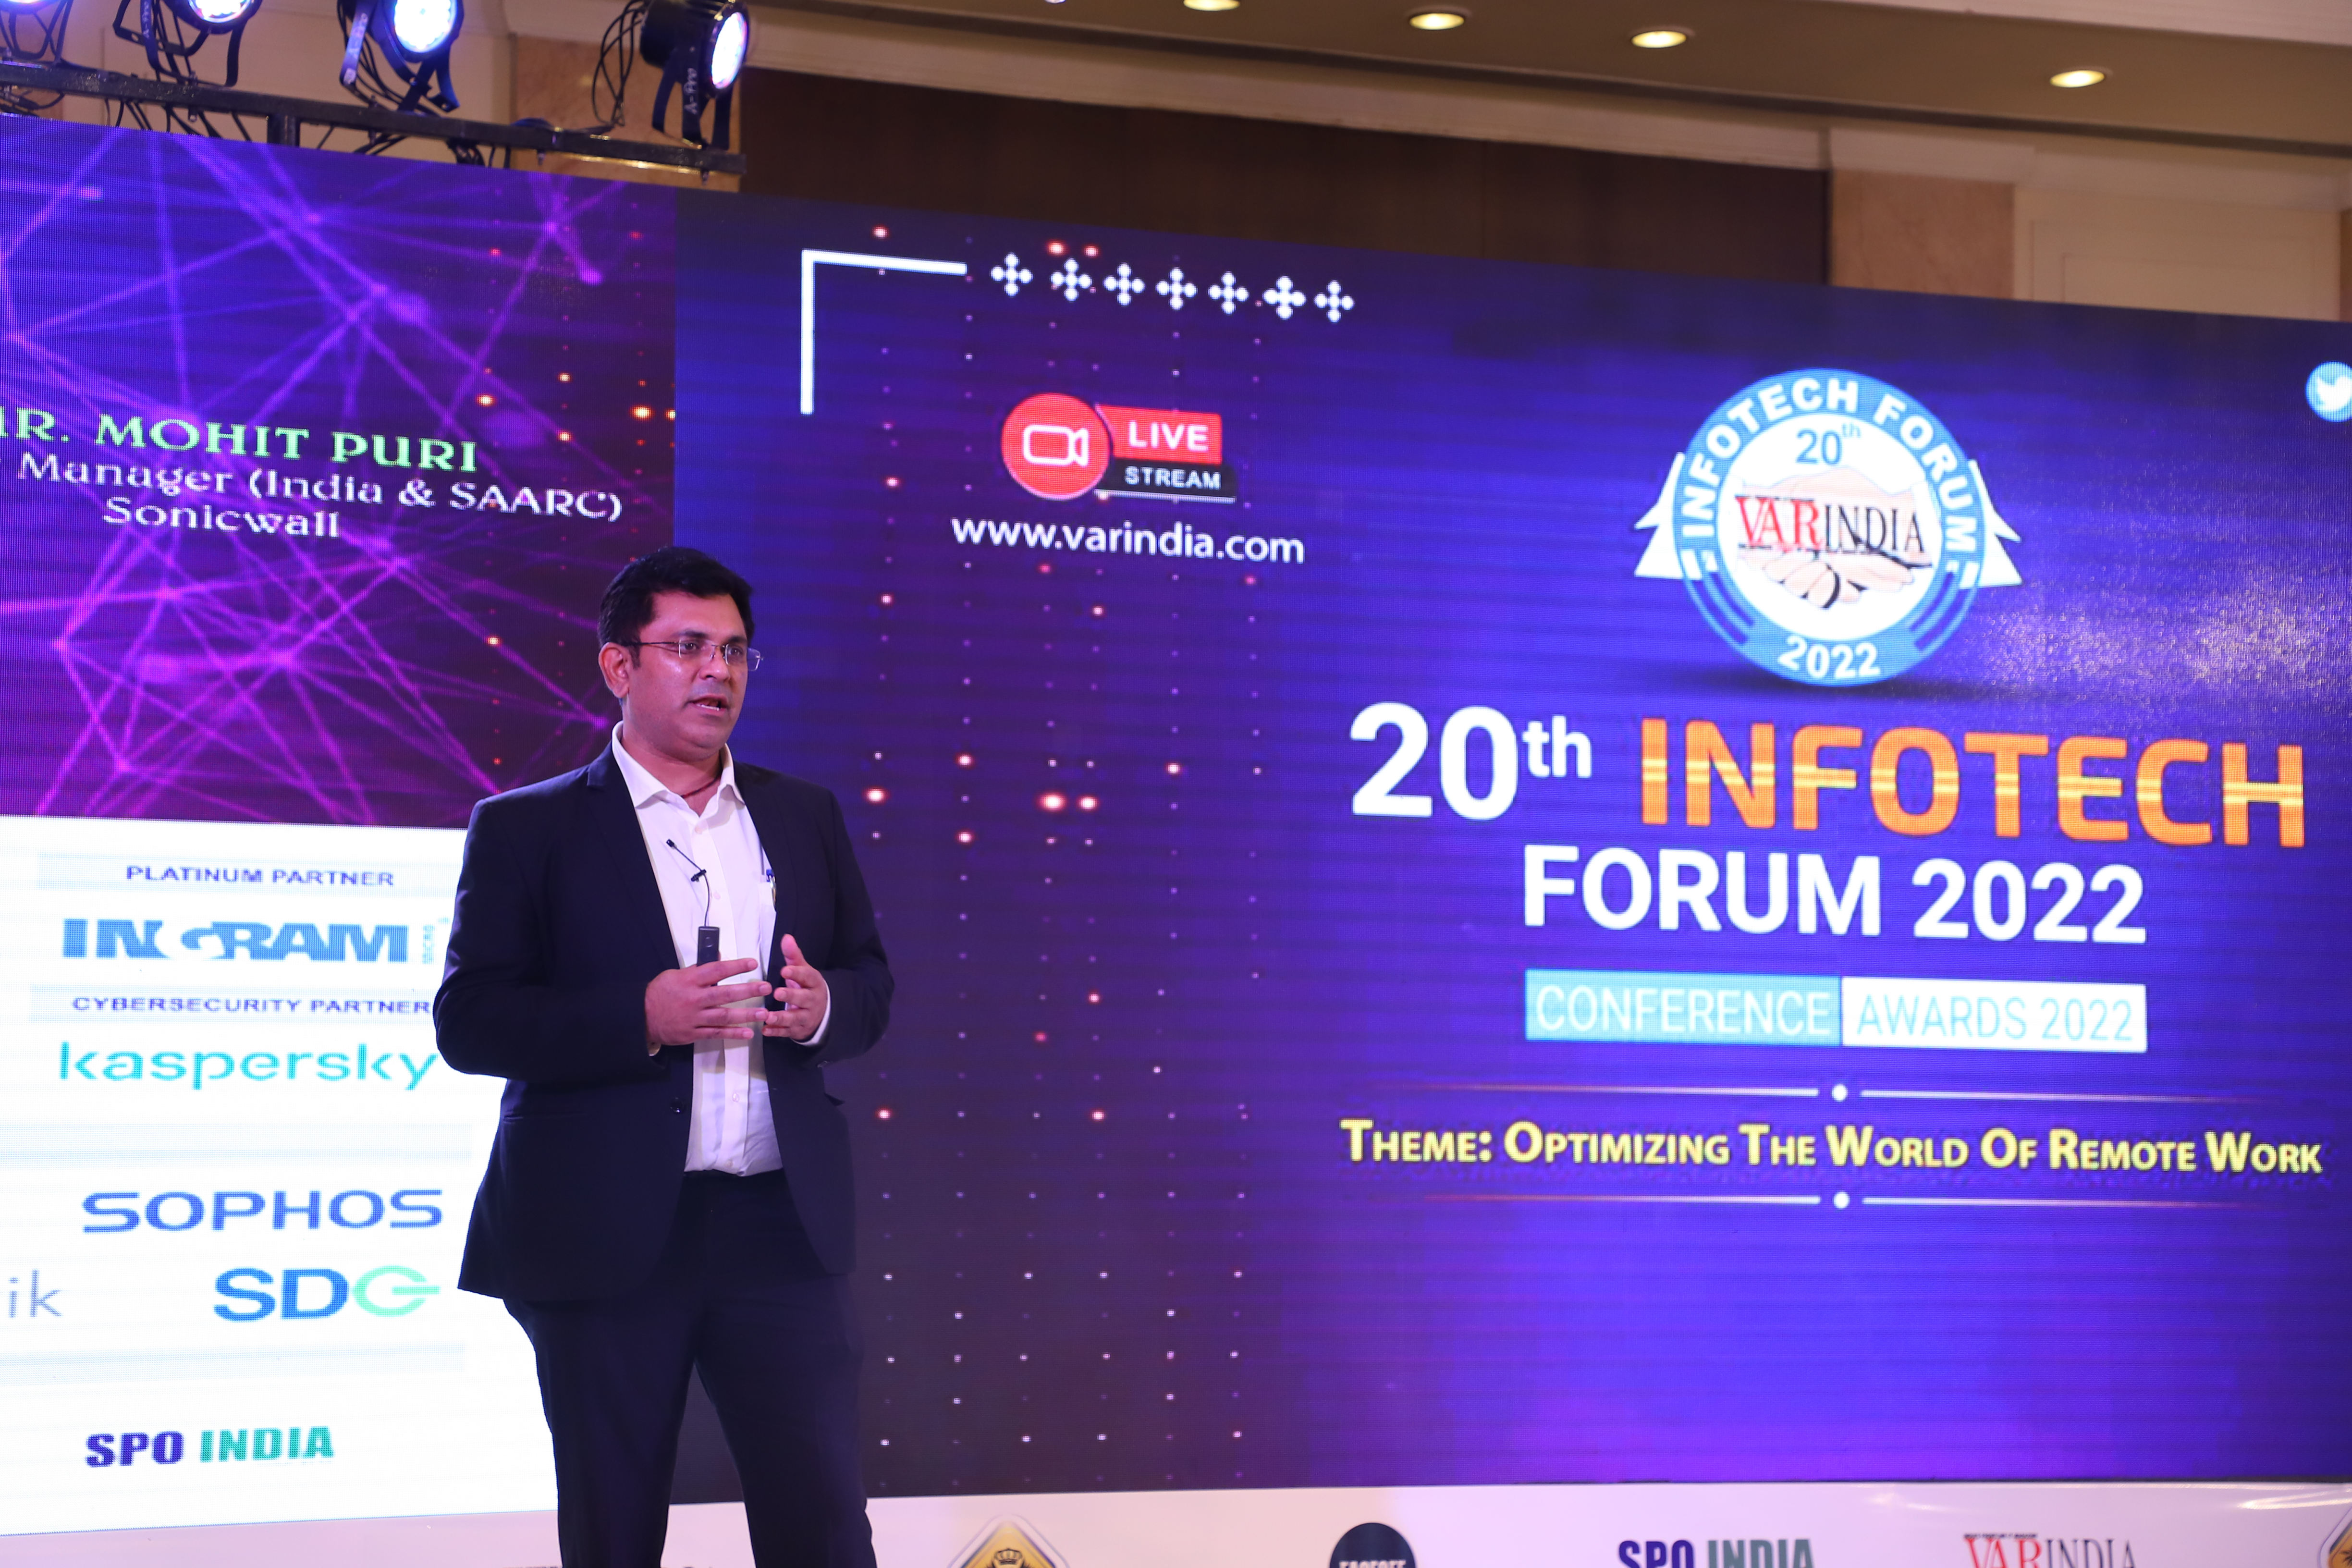 Presentation by Mohit Puri, Country Manager (India & SAARC)- SonicWall